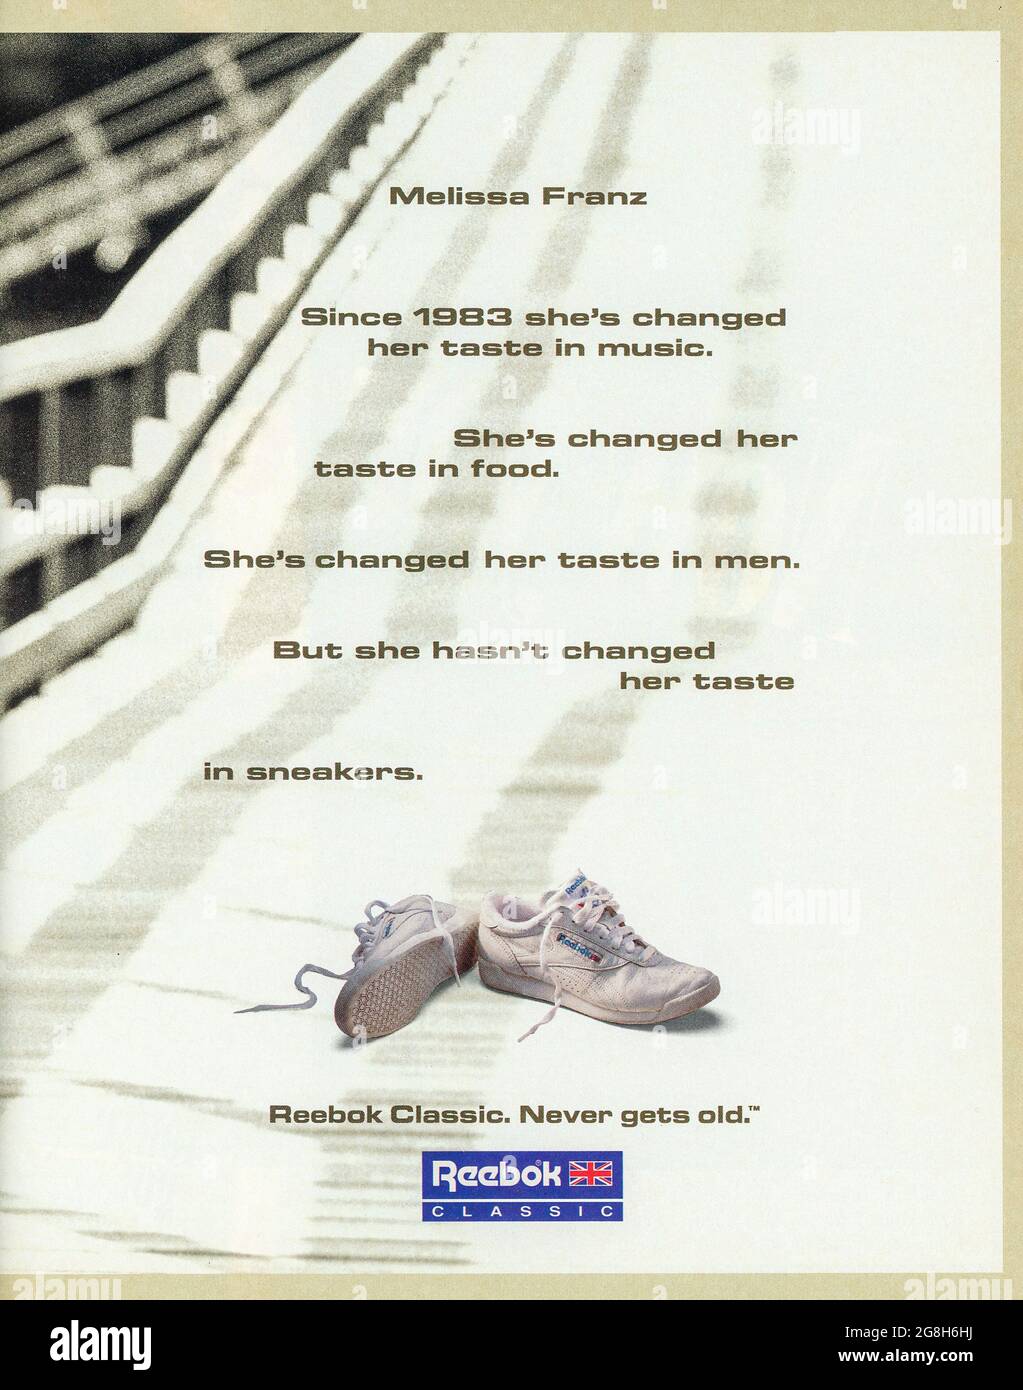 Reebok ad hi-res photography images - Alamy